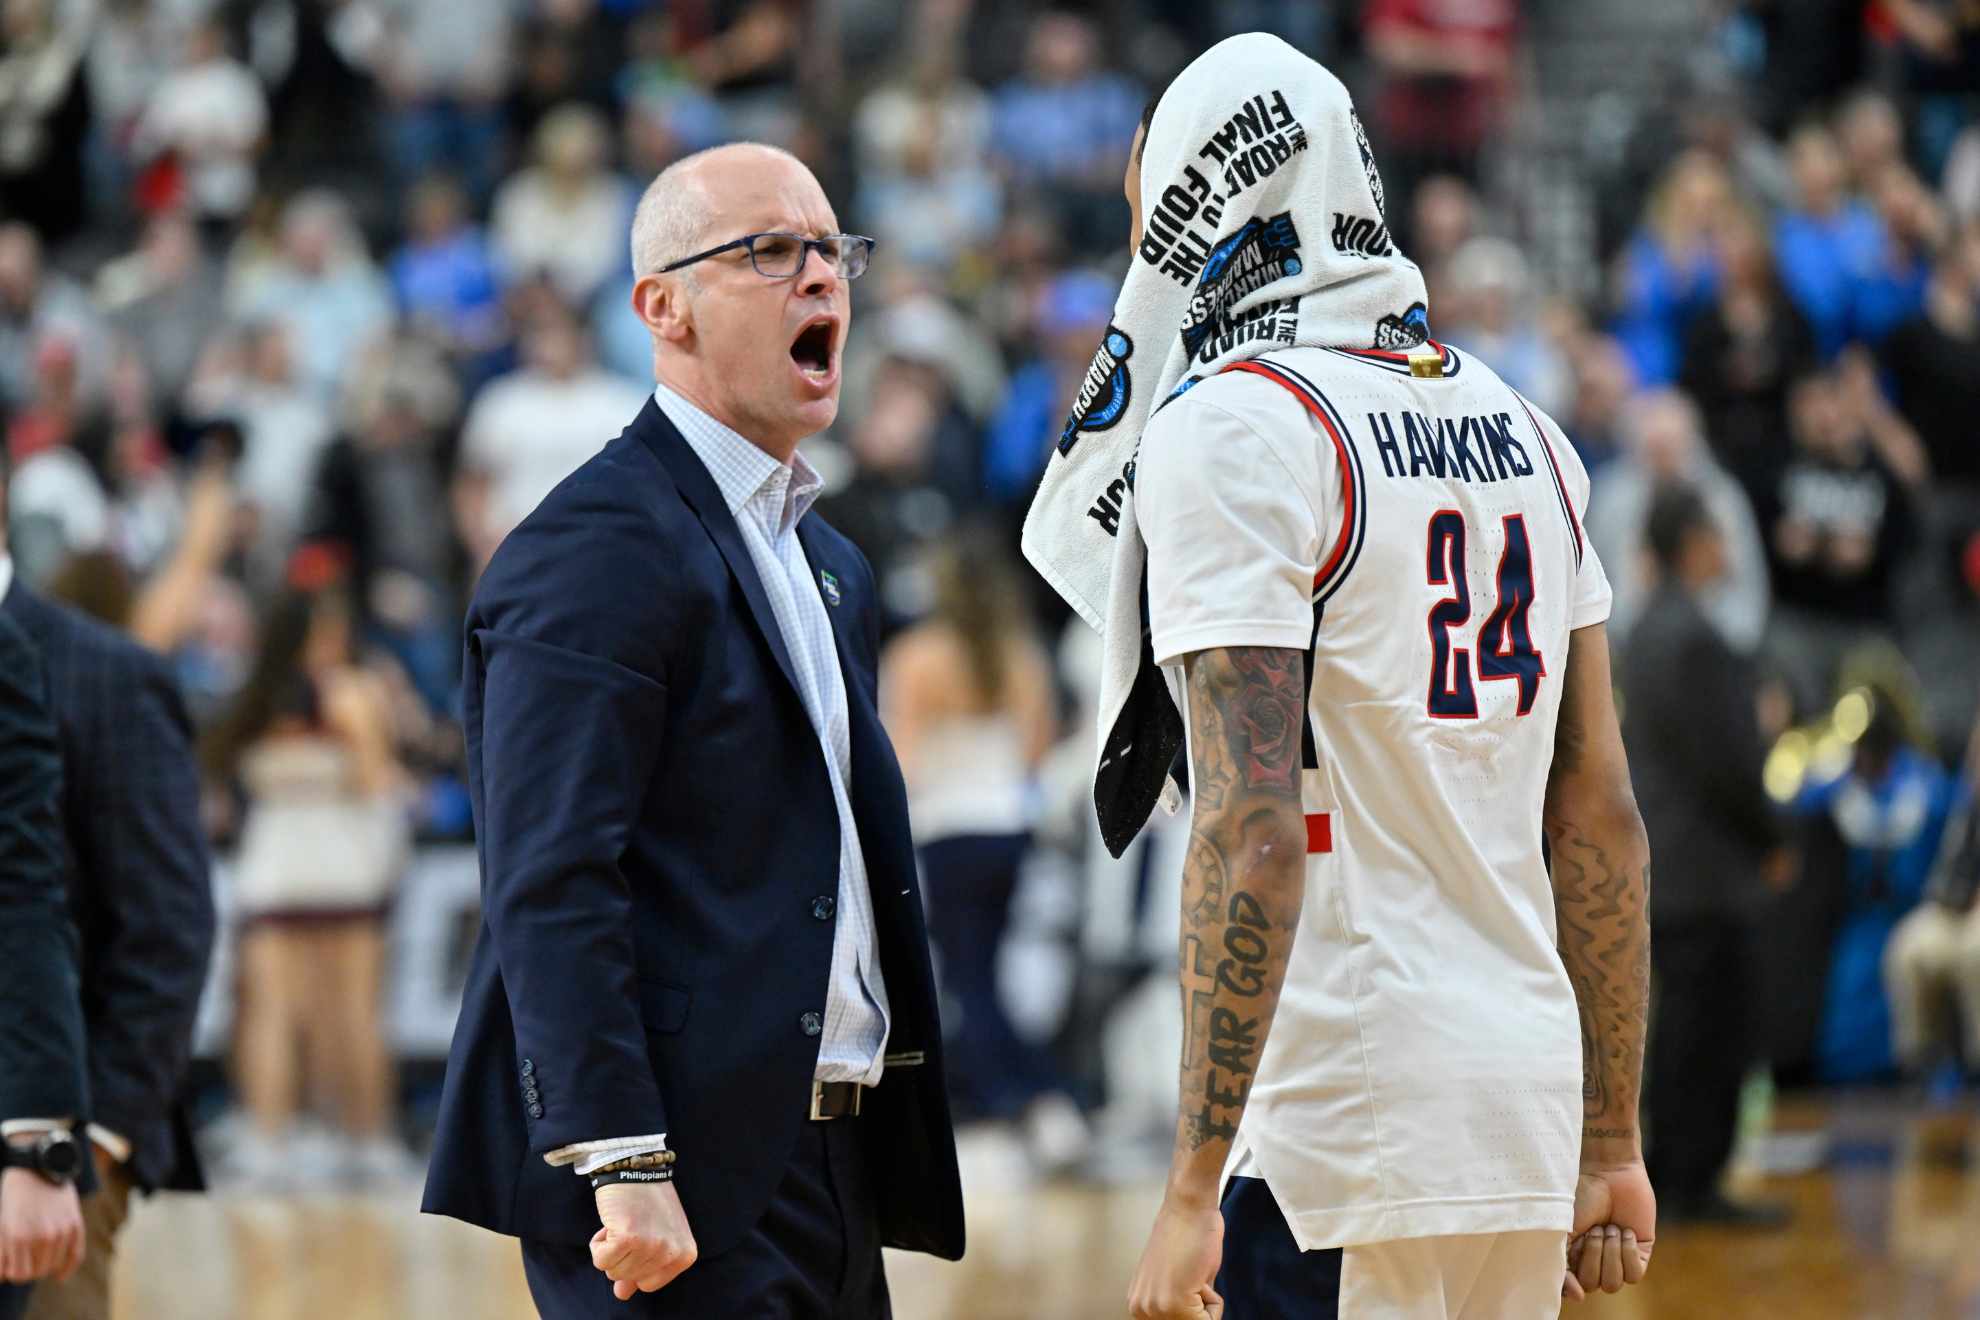 UConn head coach Dan Hurley reacts next to Jordan Hawkins (24) after the 88-65 win against Arkansas of a Sweet 16 college basketball game in the West Regional of the NCAA Tournament.